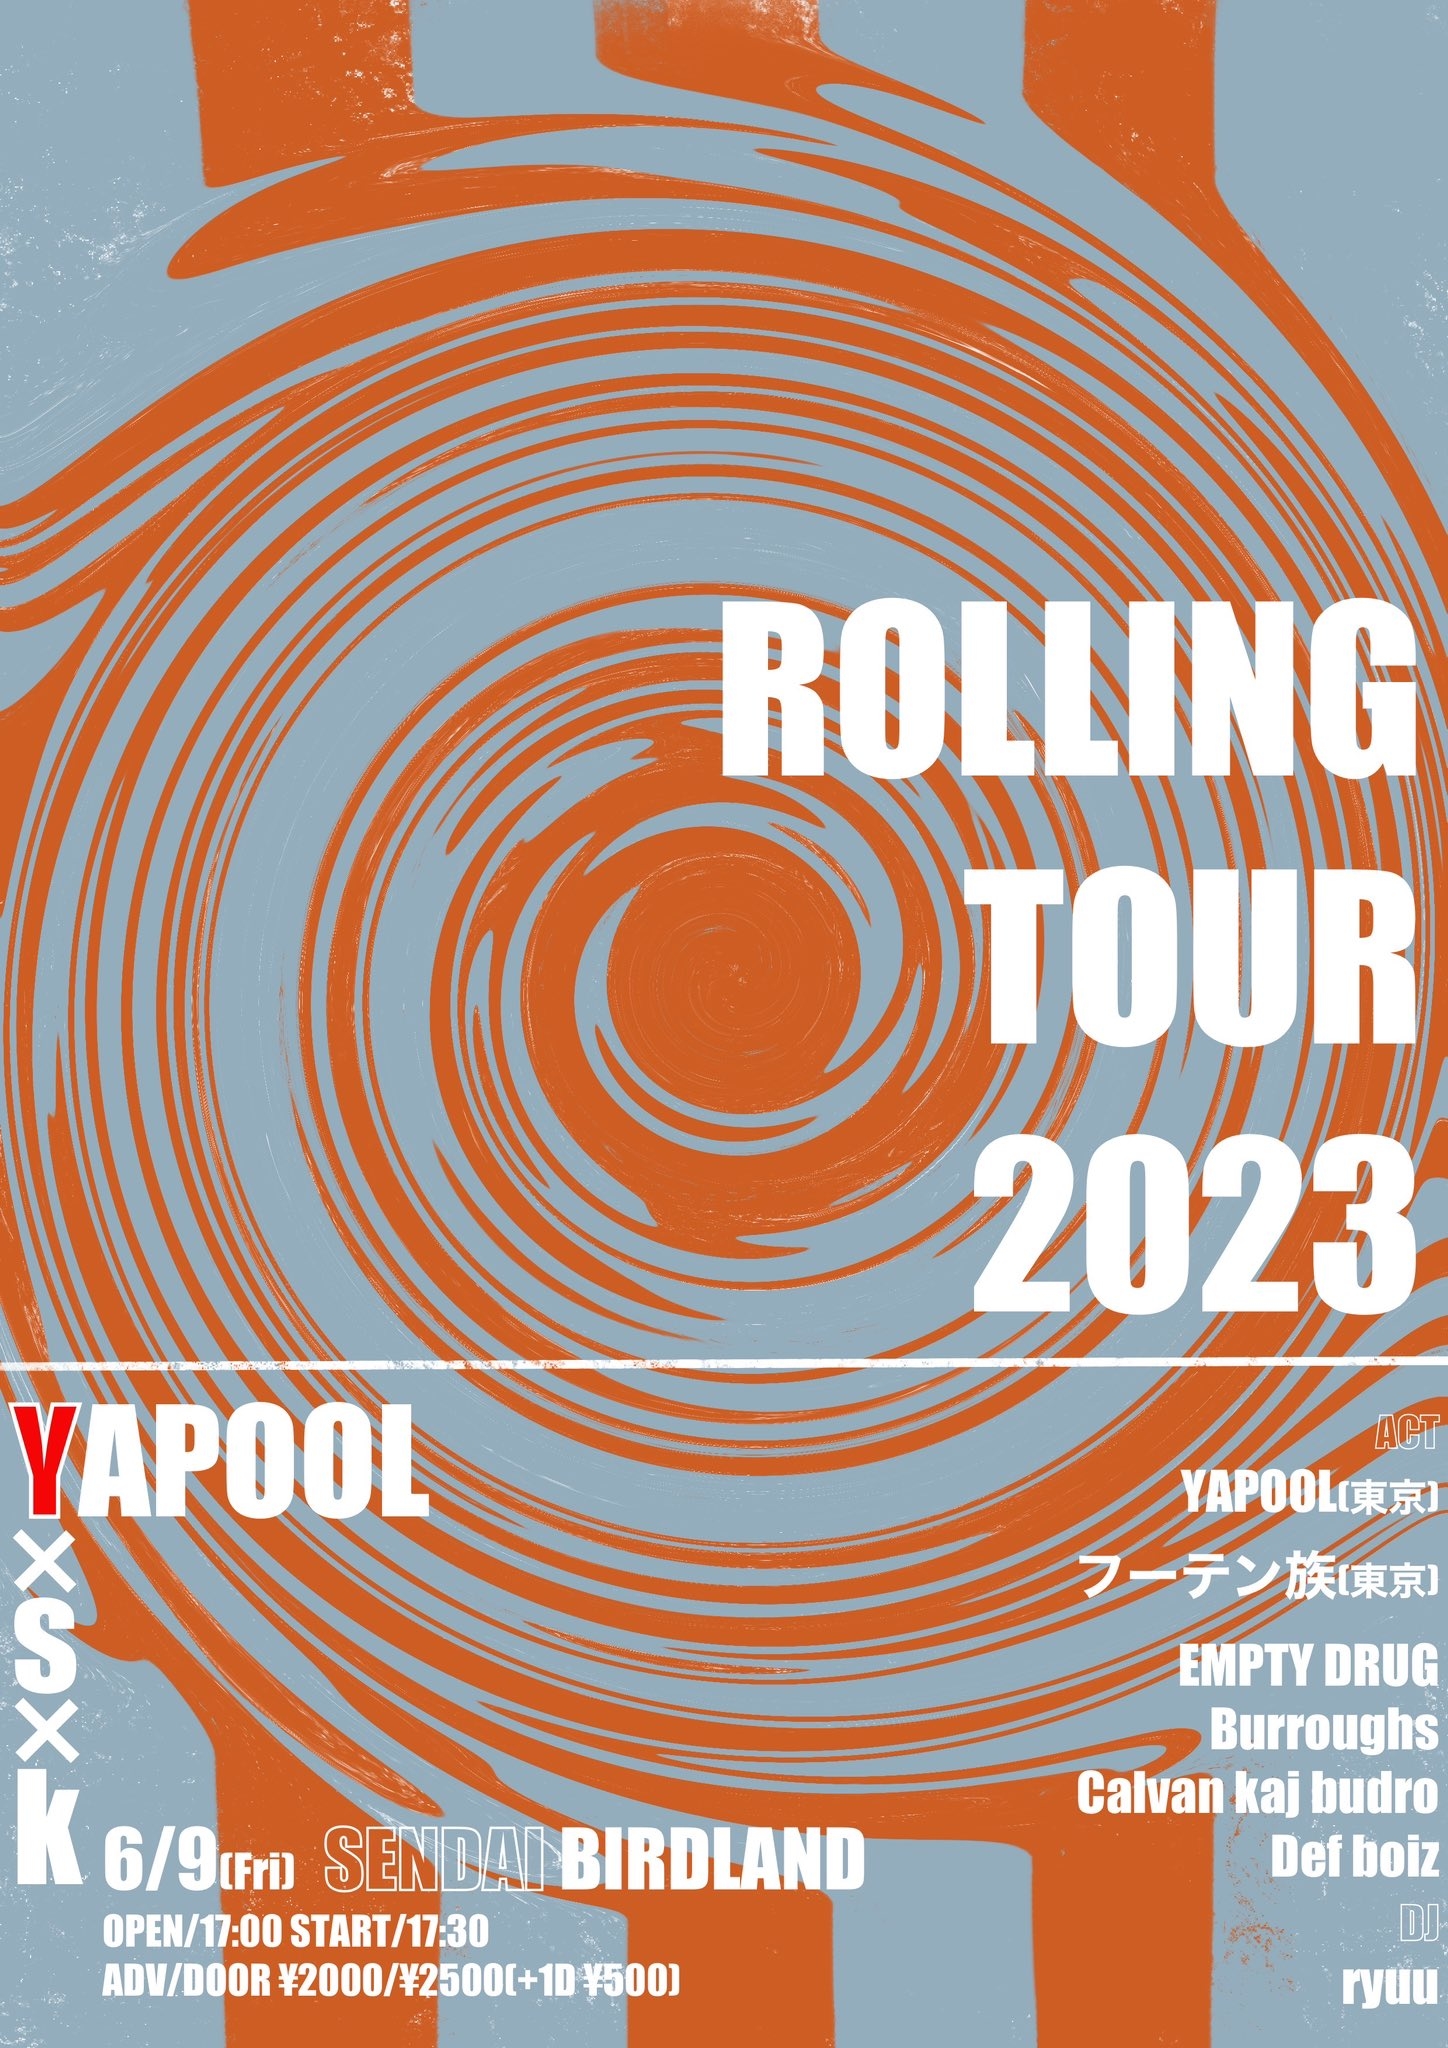 ROLLING TOUR 2023